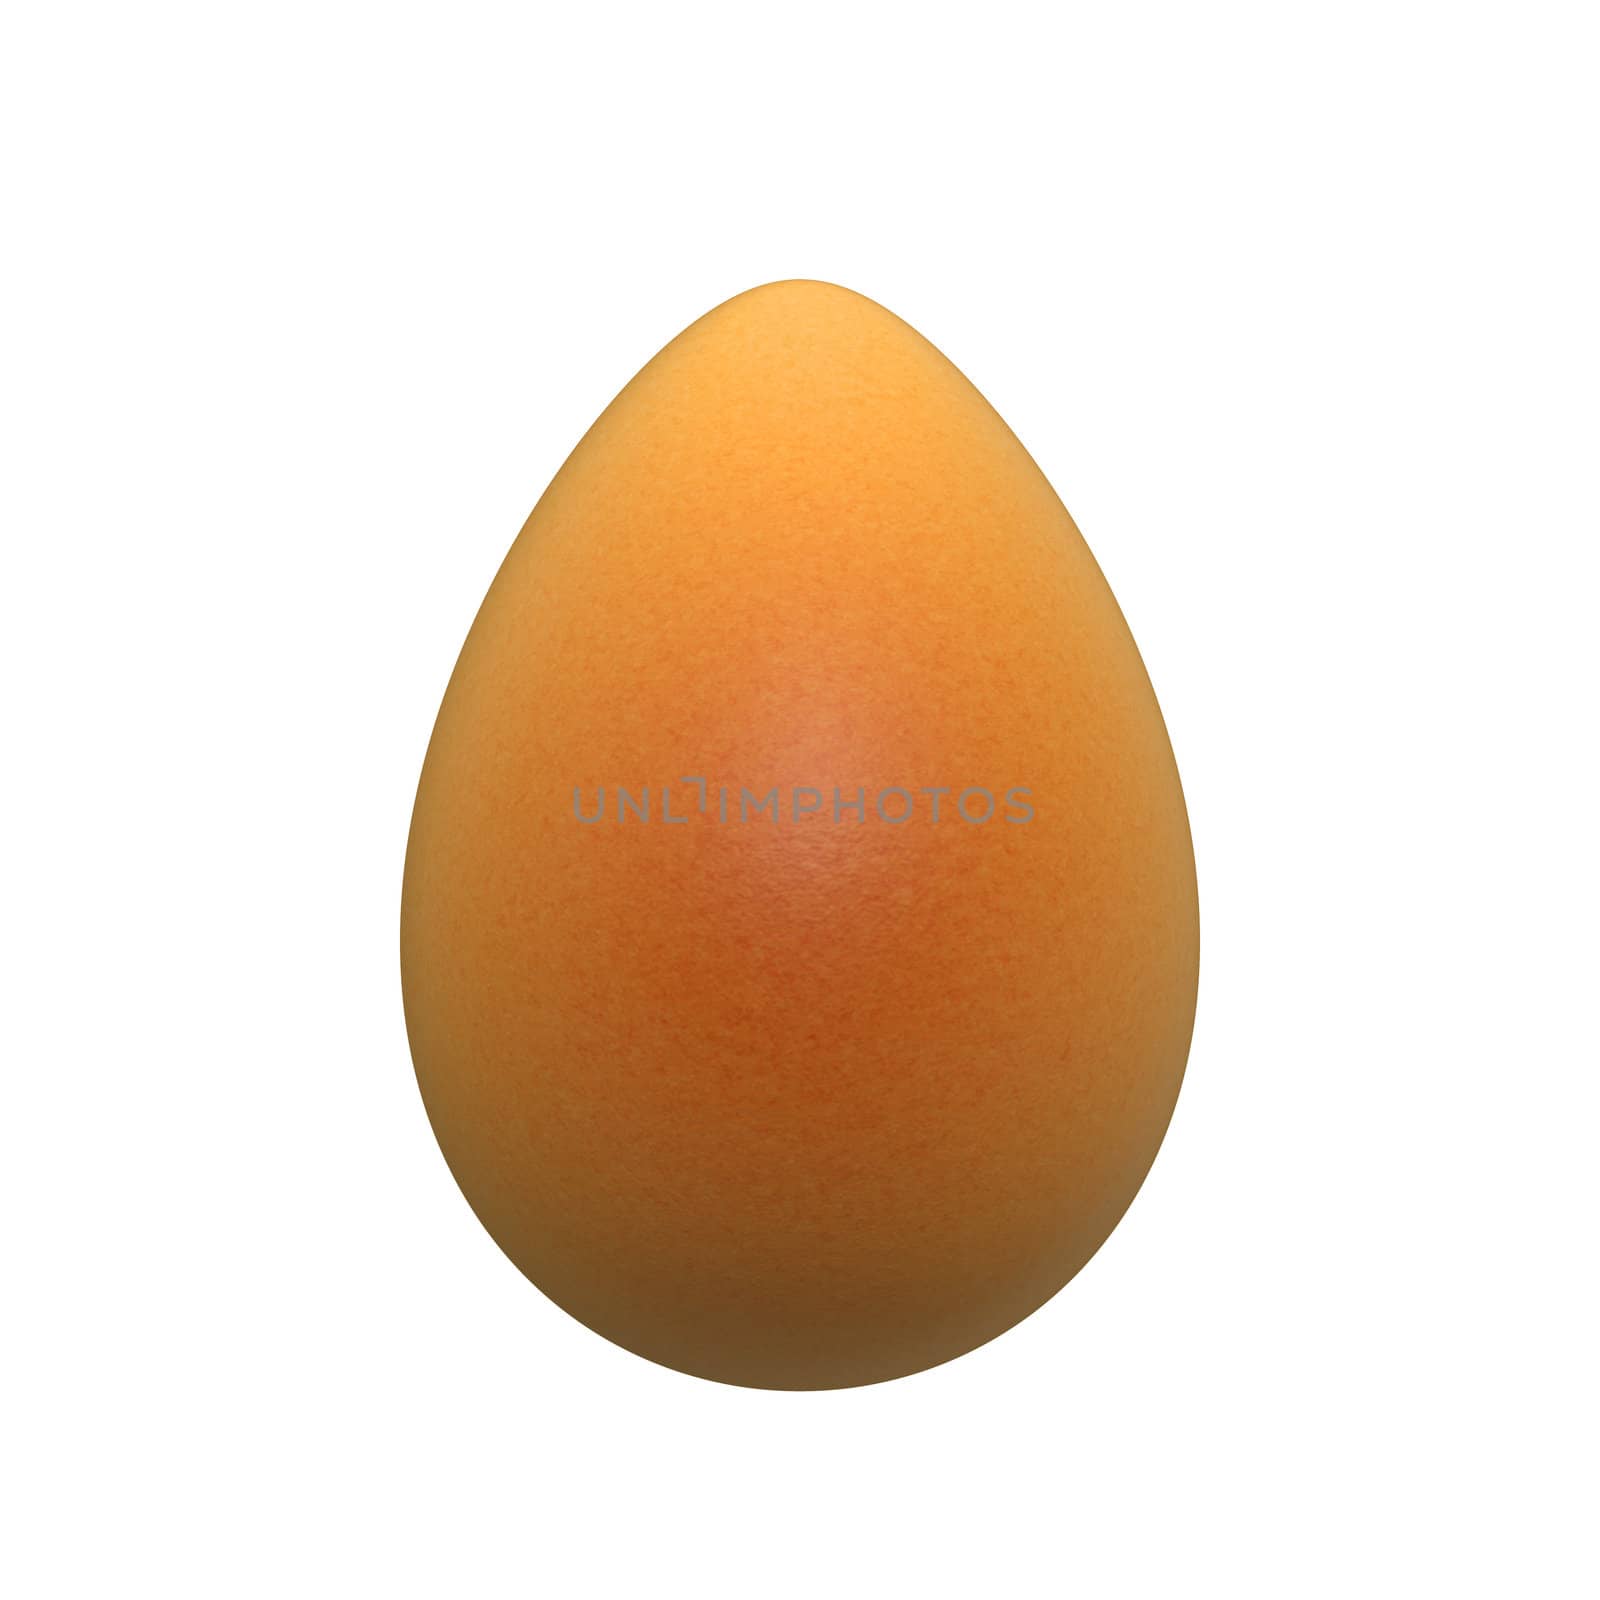 An image of an egg isolated on white